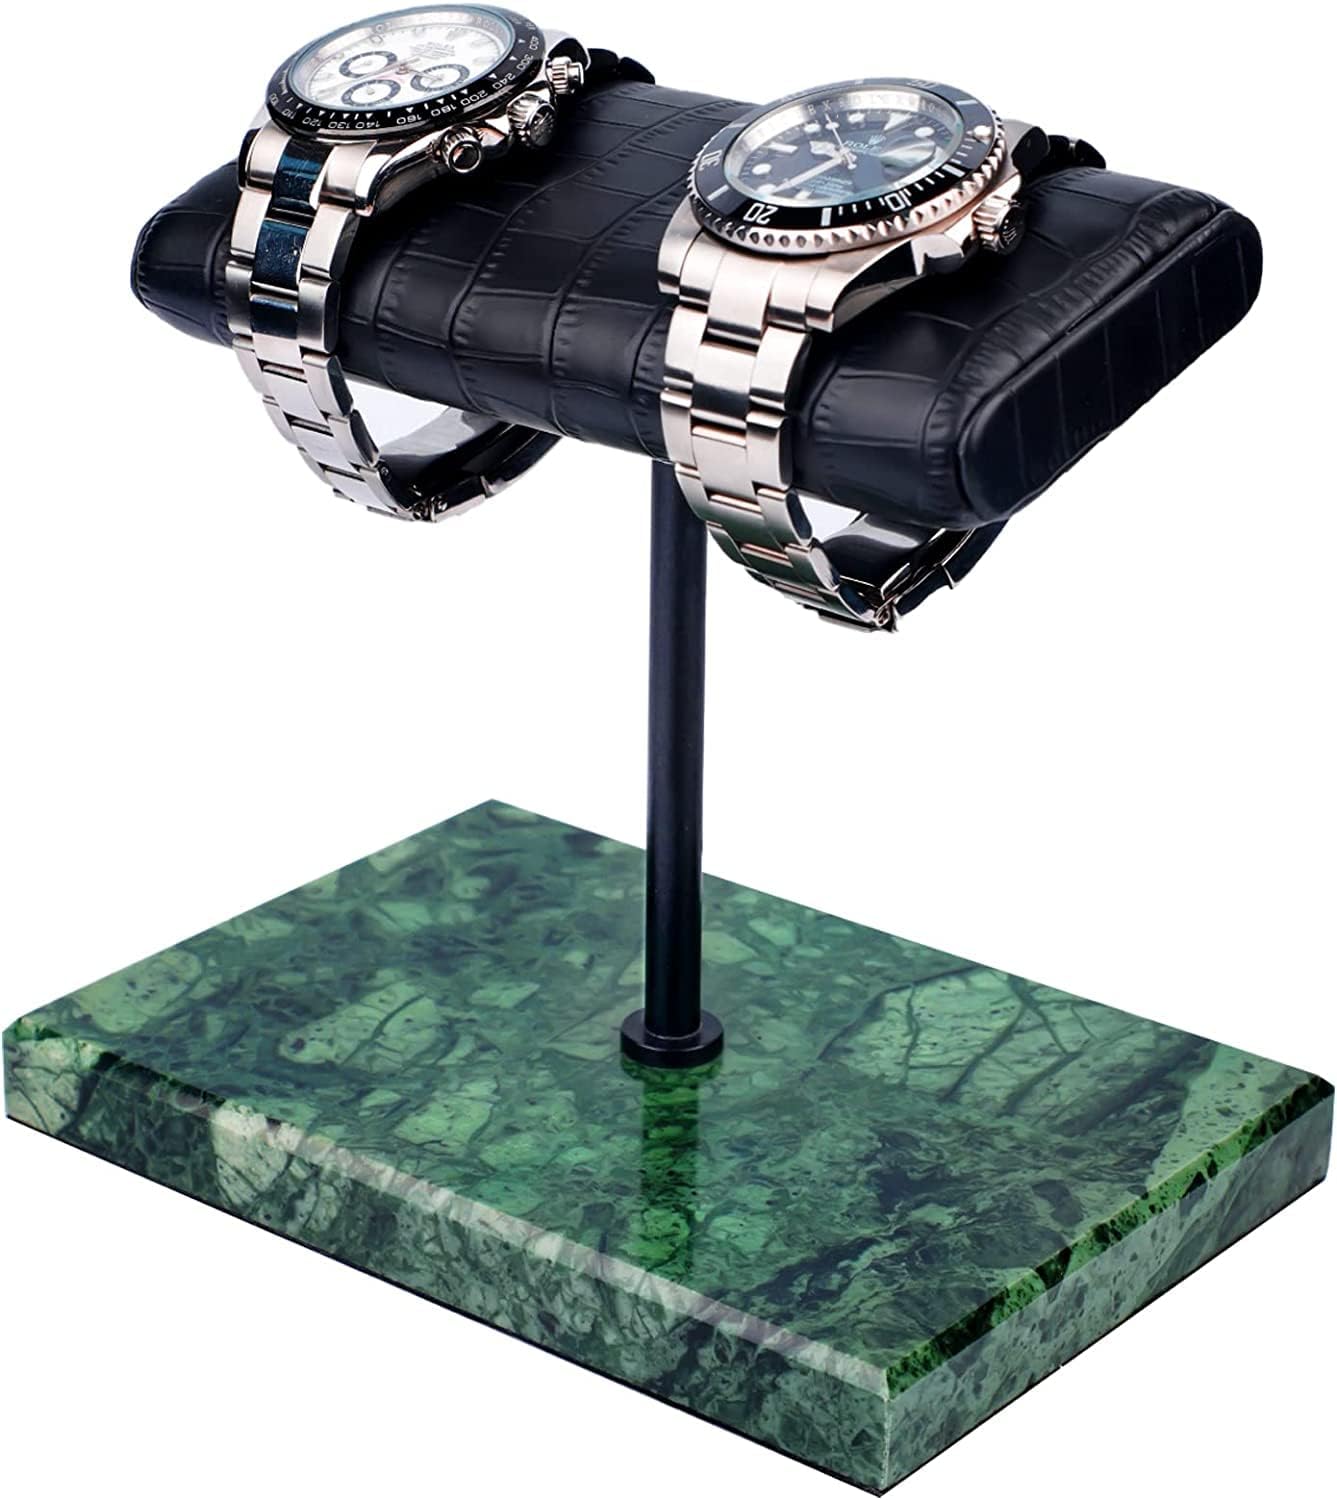 Luxury Watch Stand - Double Cushion (Marble Base) - Green